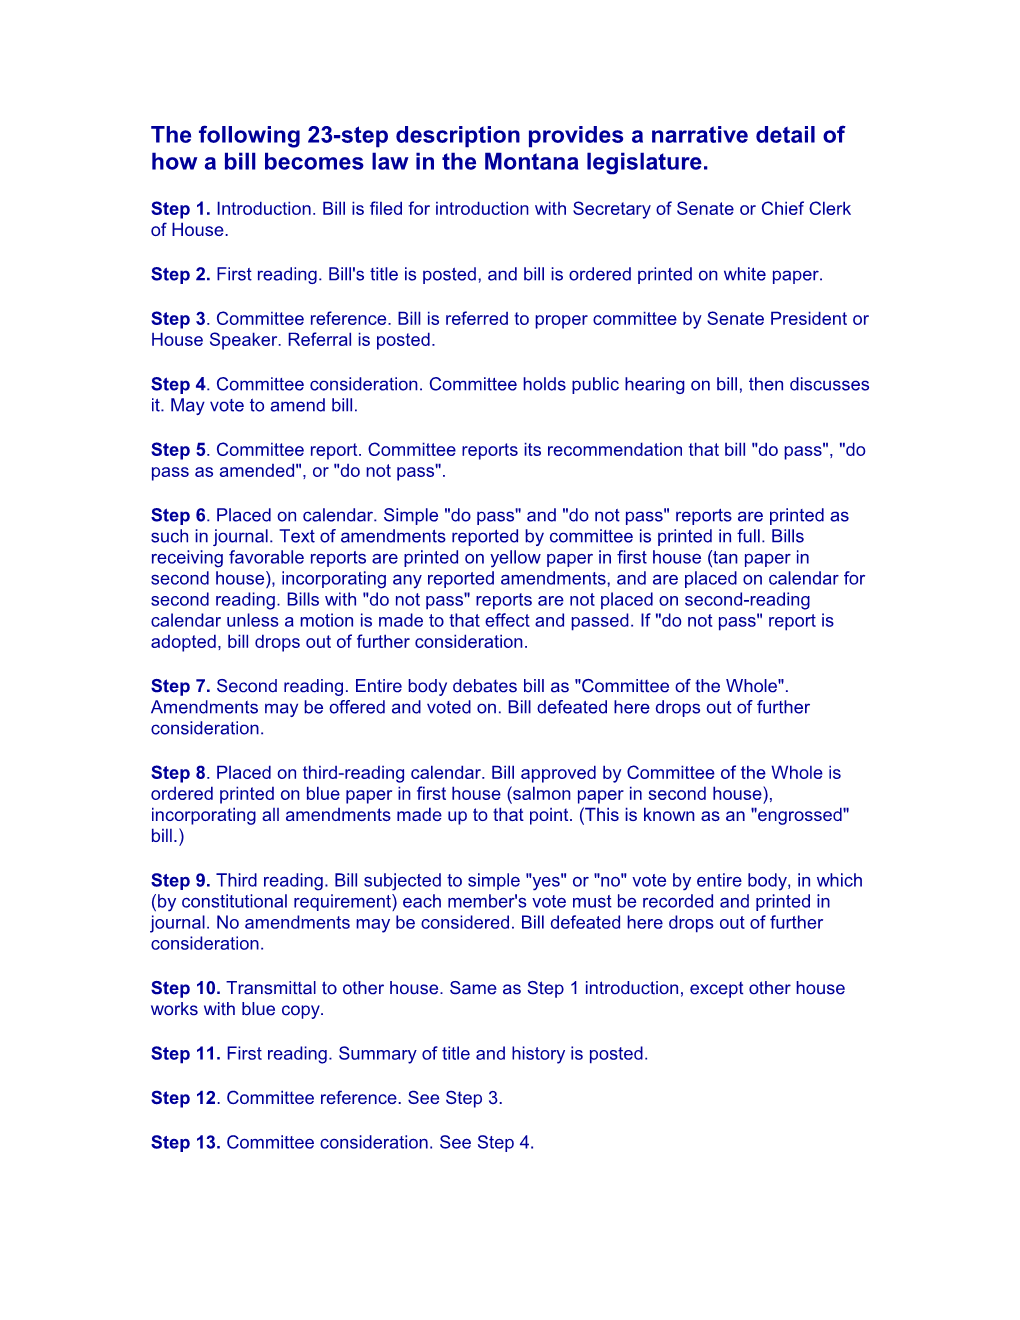 The Following 23-Step Description Provides a Narrative Detail of How a Bill Becomes Law